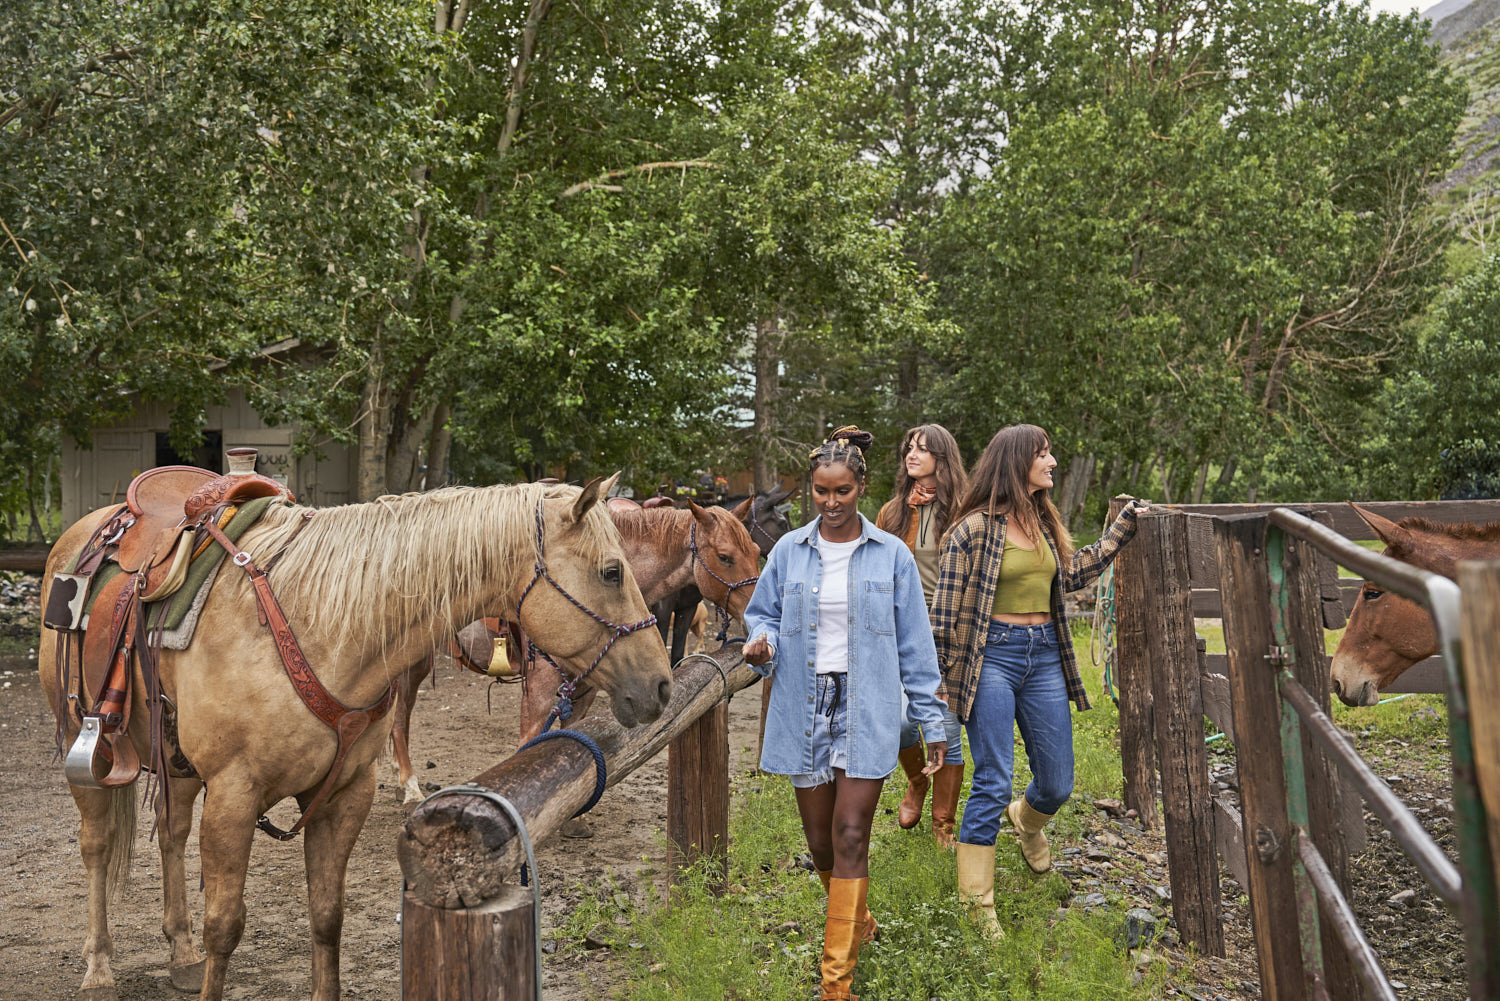 Three women casually pass an open stable, while horses observe with curious and intrigued looks.